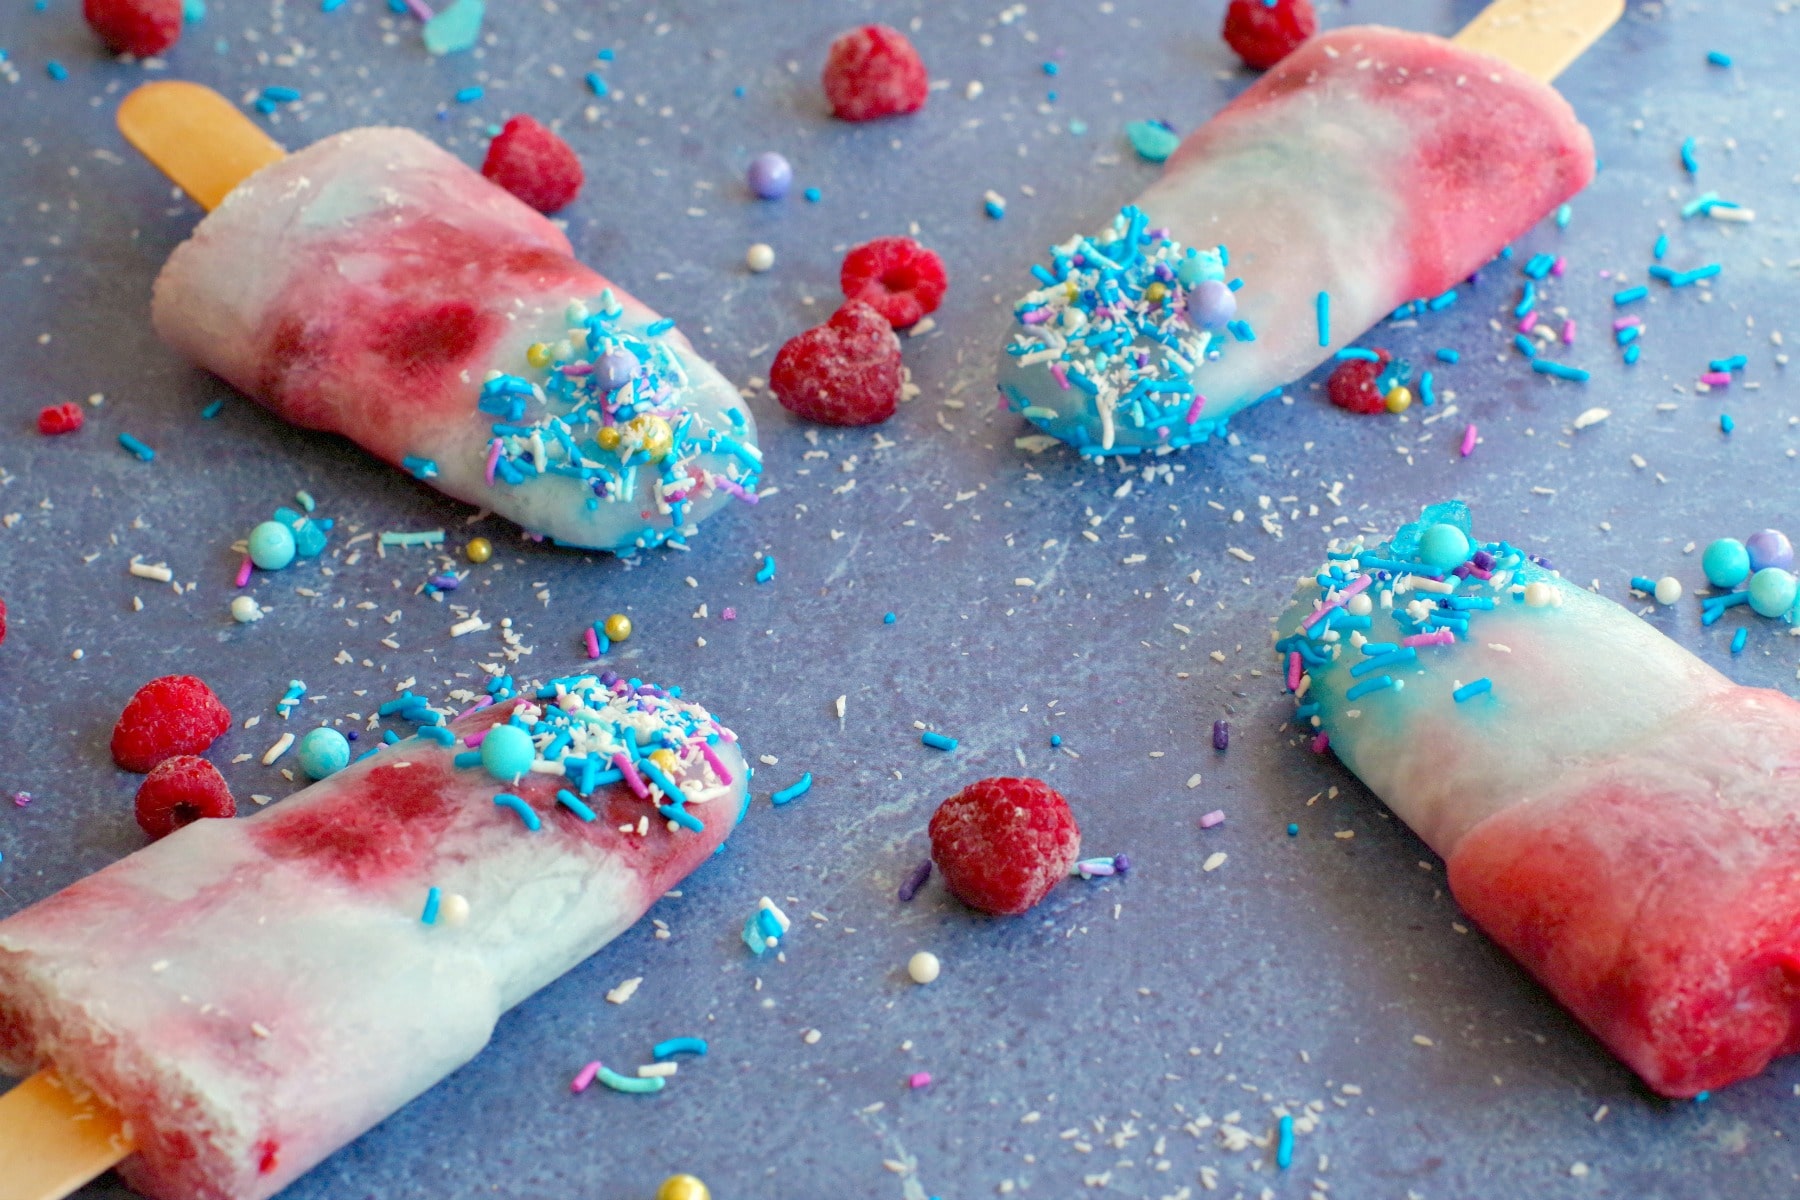 4 blue raspberry popsicles on blue surface with coconut, frozen raspberries and sprinkles all around